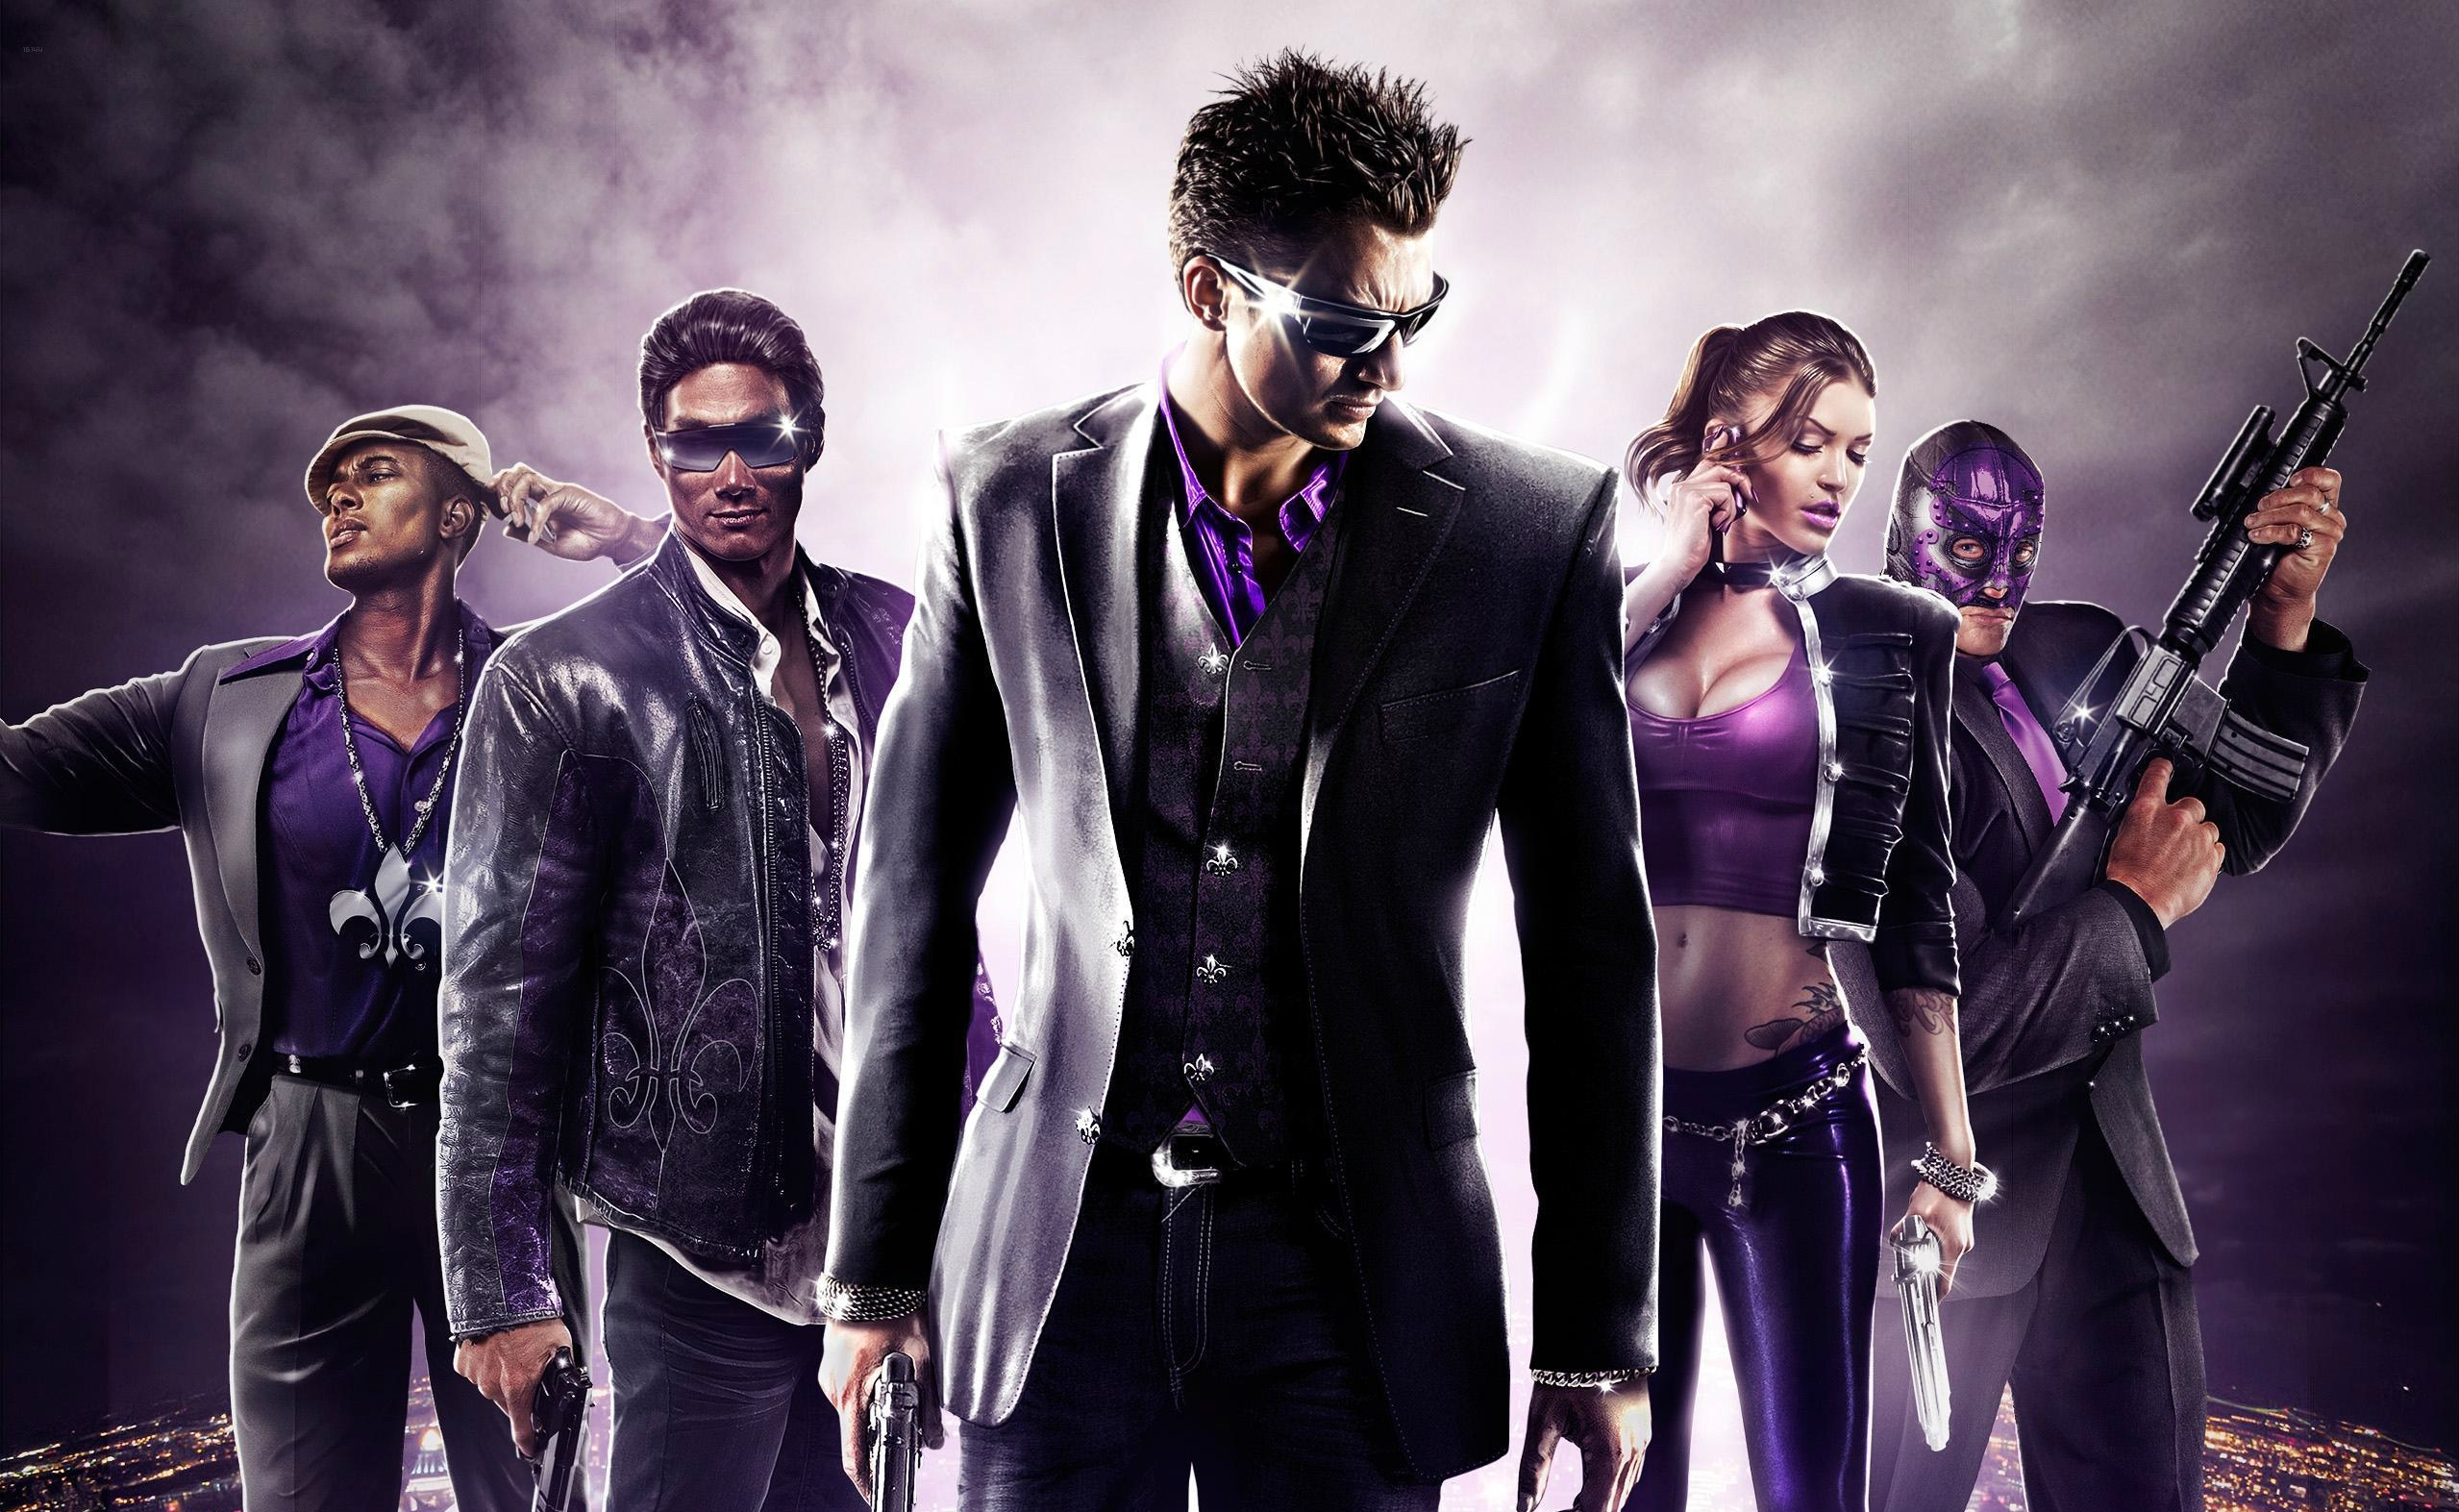 Unholy Saints Gathered in a video game: Saints Row: The Third, depicting Saint Row.